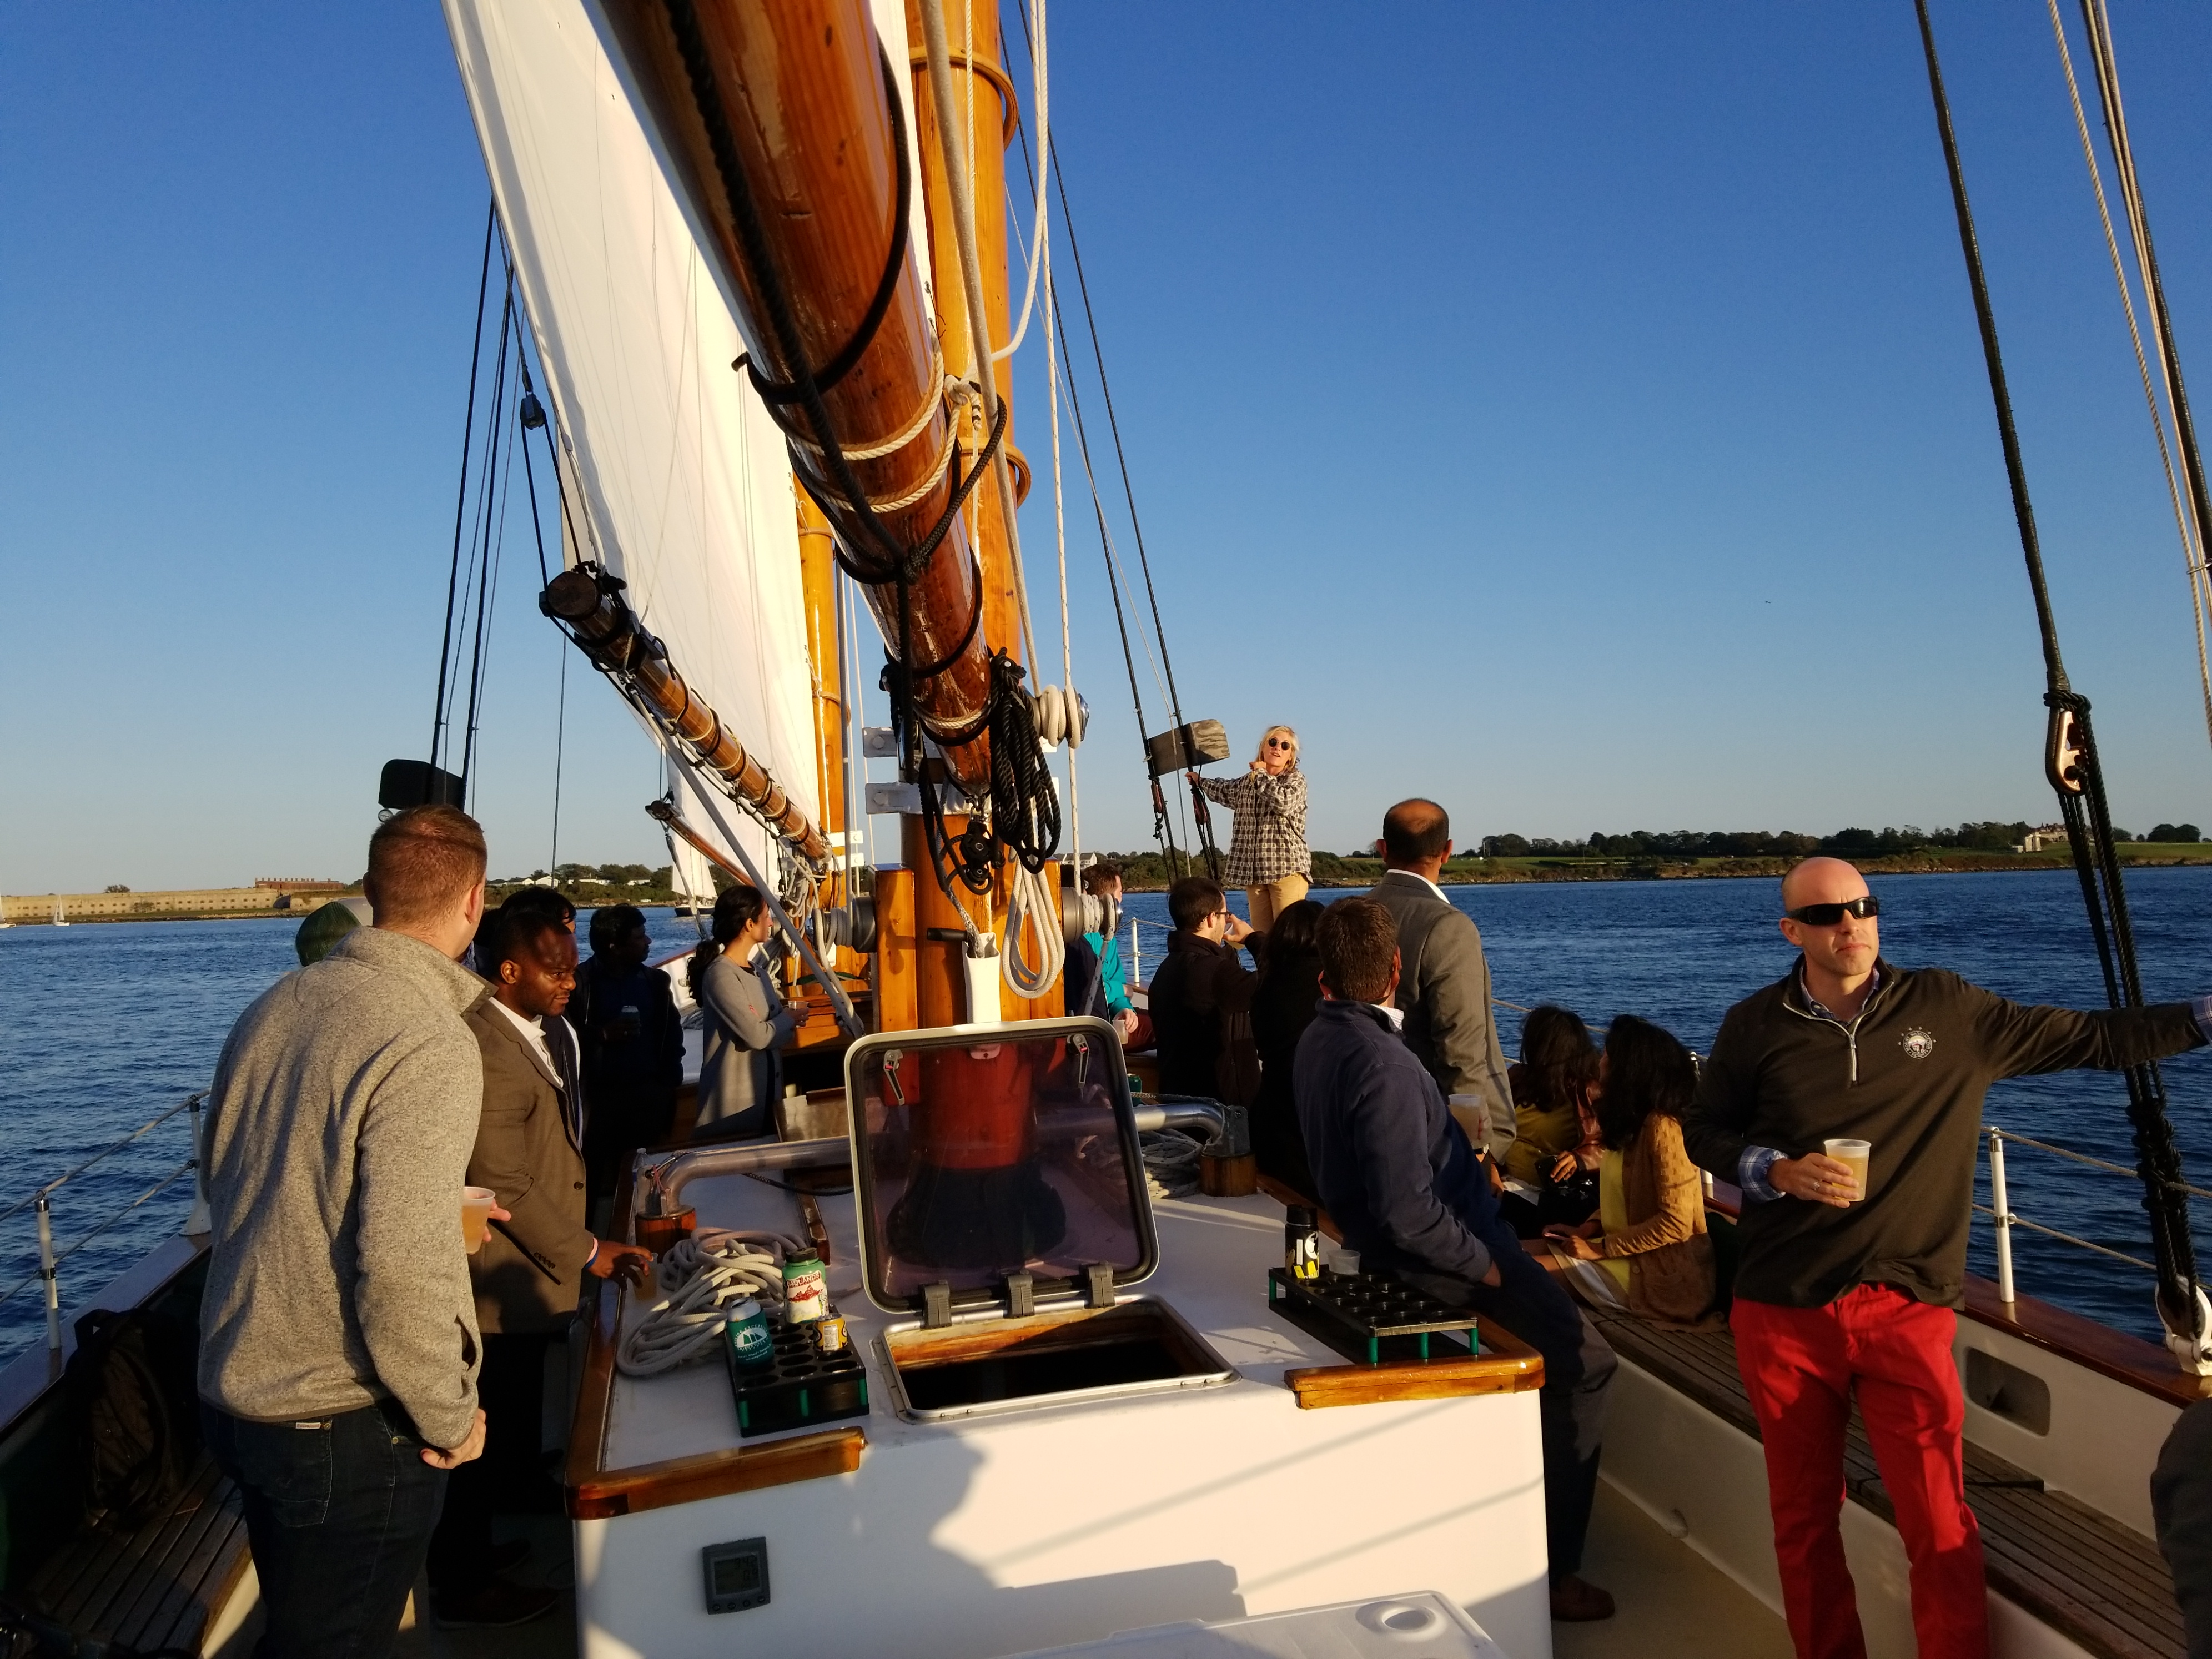 Tourist enjoying a sunset sail drinks - an experience included in The Coast Guard House & Sunset Sail Tour.